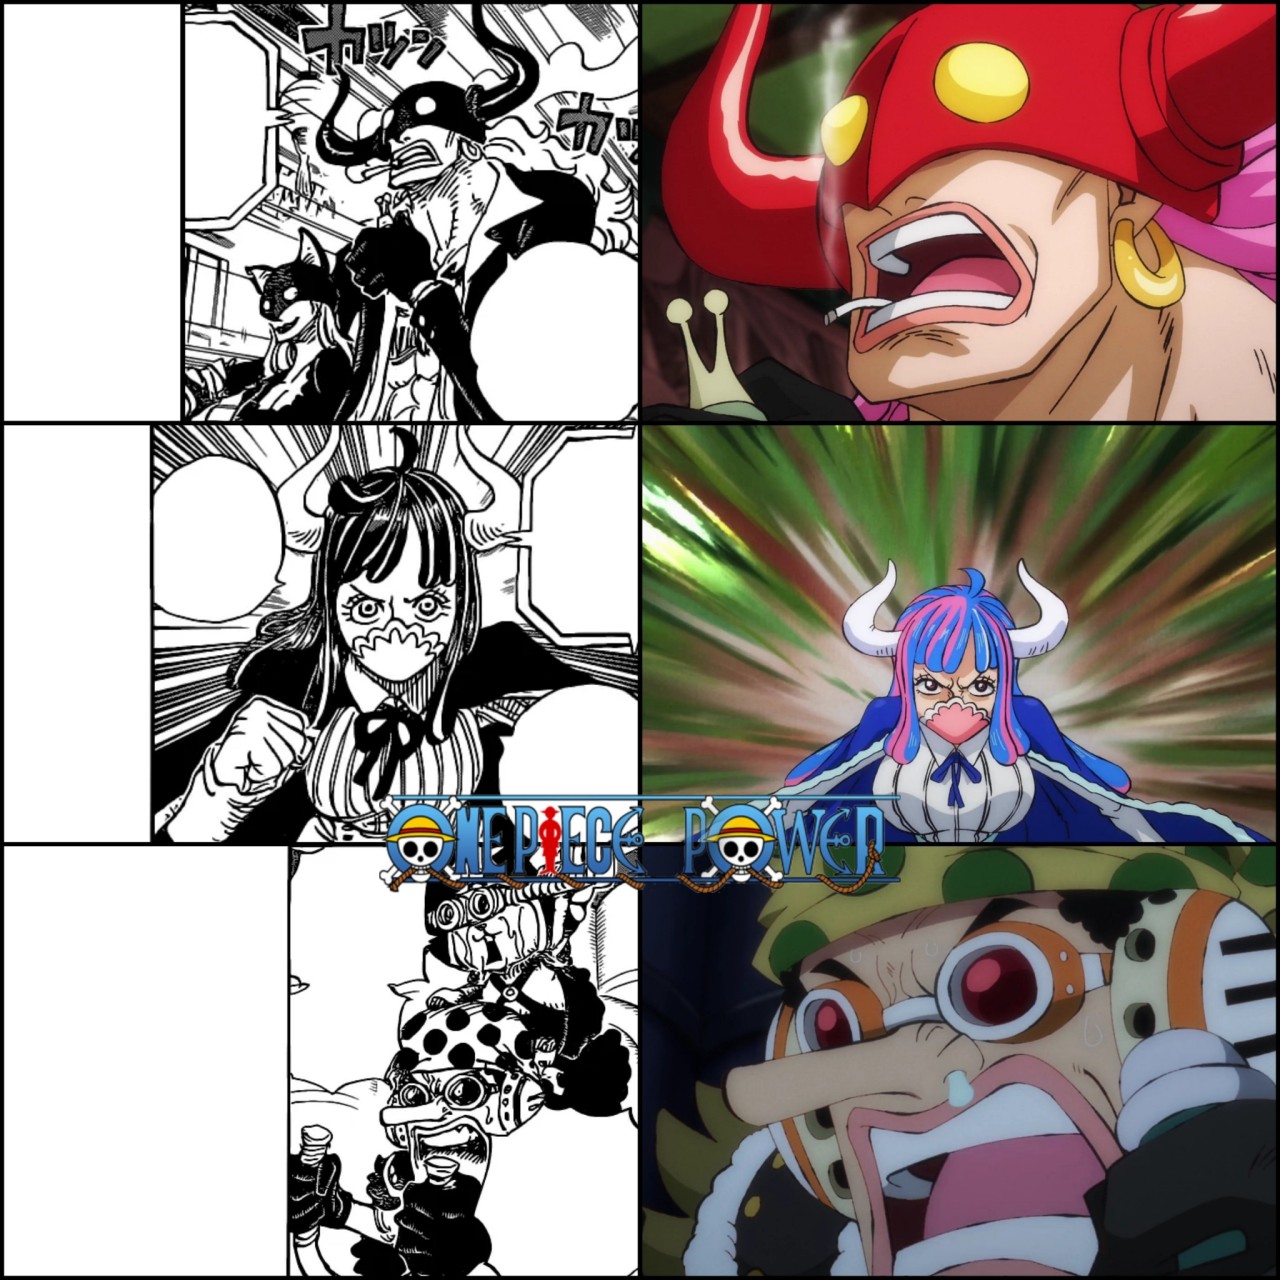 Yamato-stans (Chapter 1057 Spoilers) : r/MemePiece